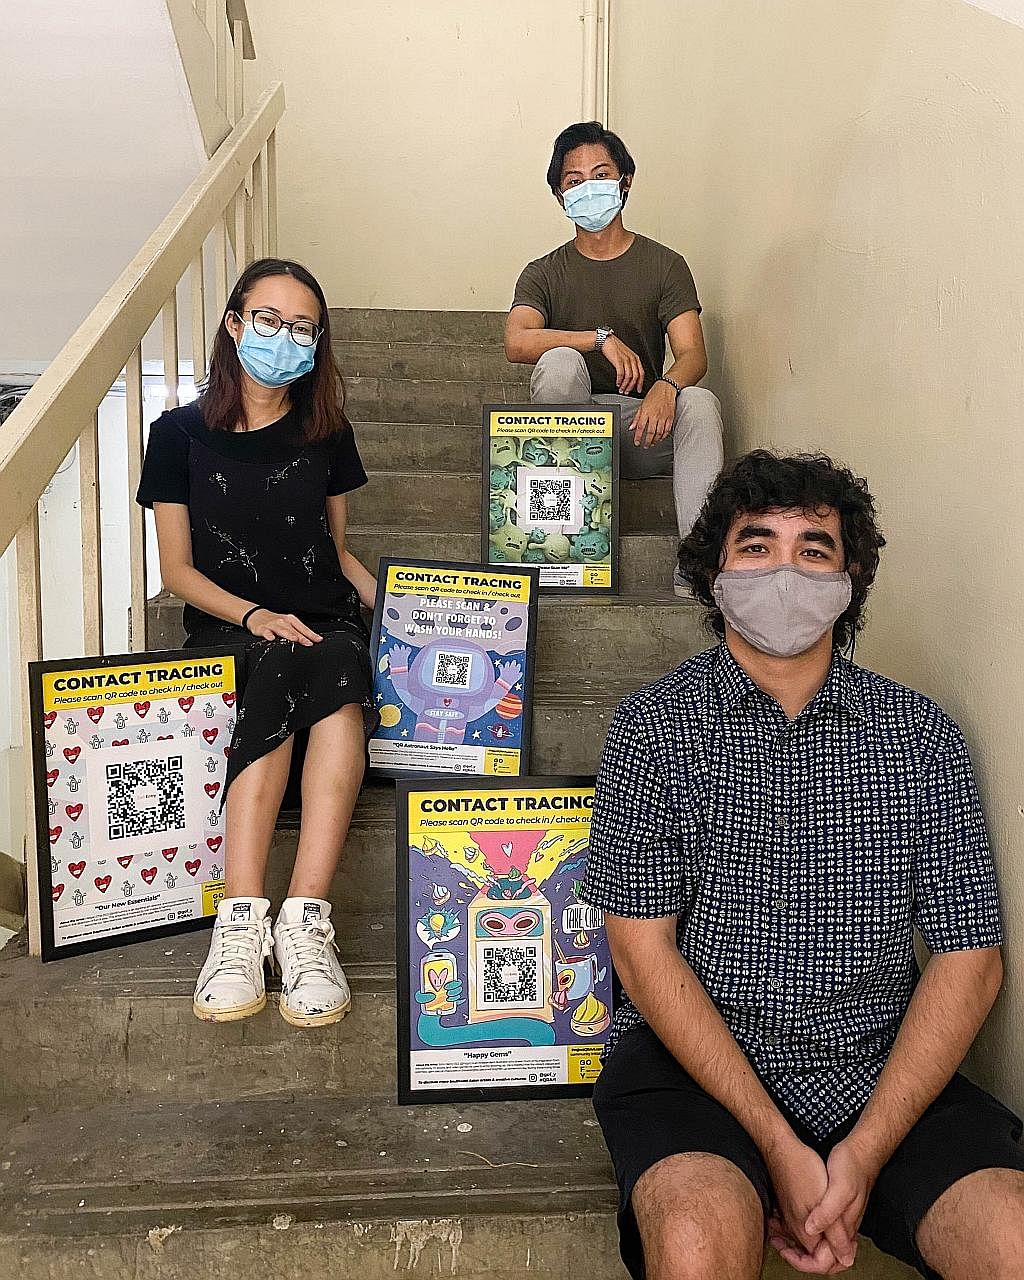 Singaporeans John Henry (front), 32, Megan Chia, 20, and Zul Eddy Zain, 24, are among artists who have designed SafeEntry posters that can be downloaded for free under Project #QRArt. Launched by home-grown creative collaborative GOFY, the project ha